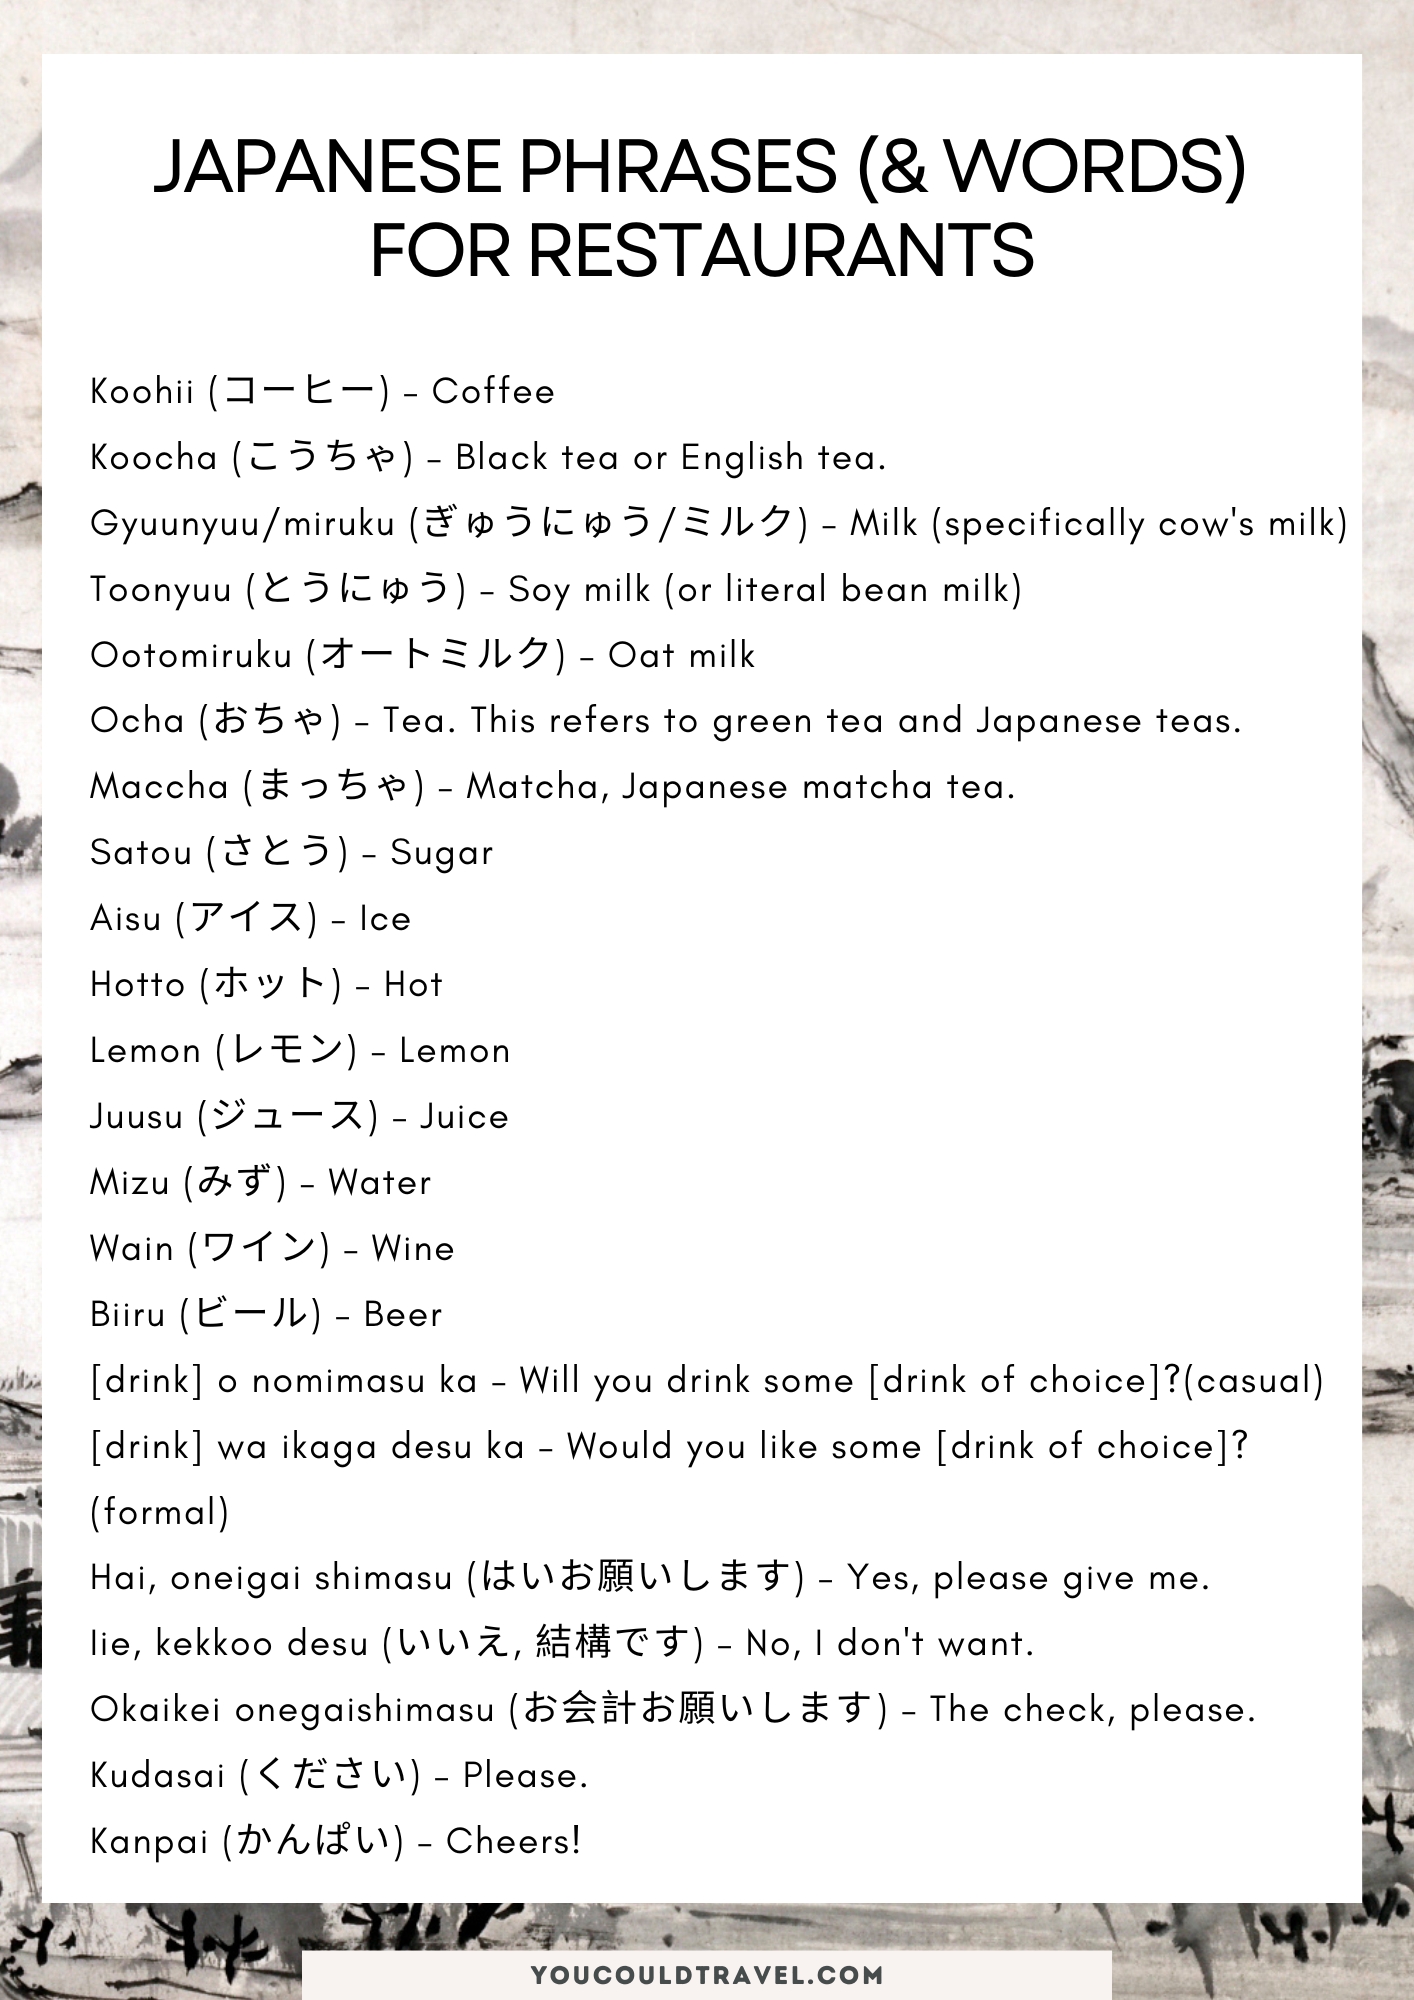 Japanese phrases and words to use in restaurants